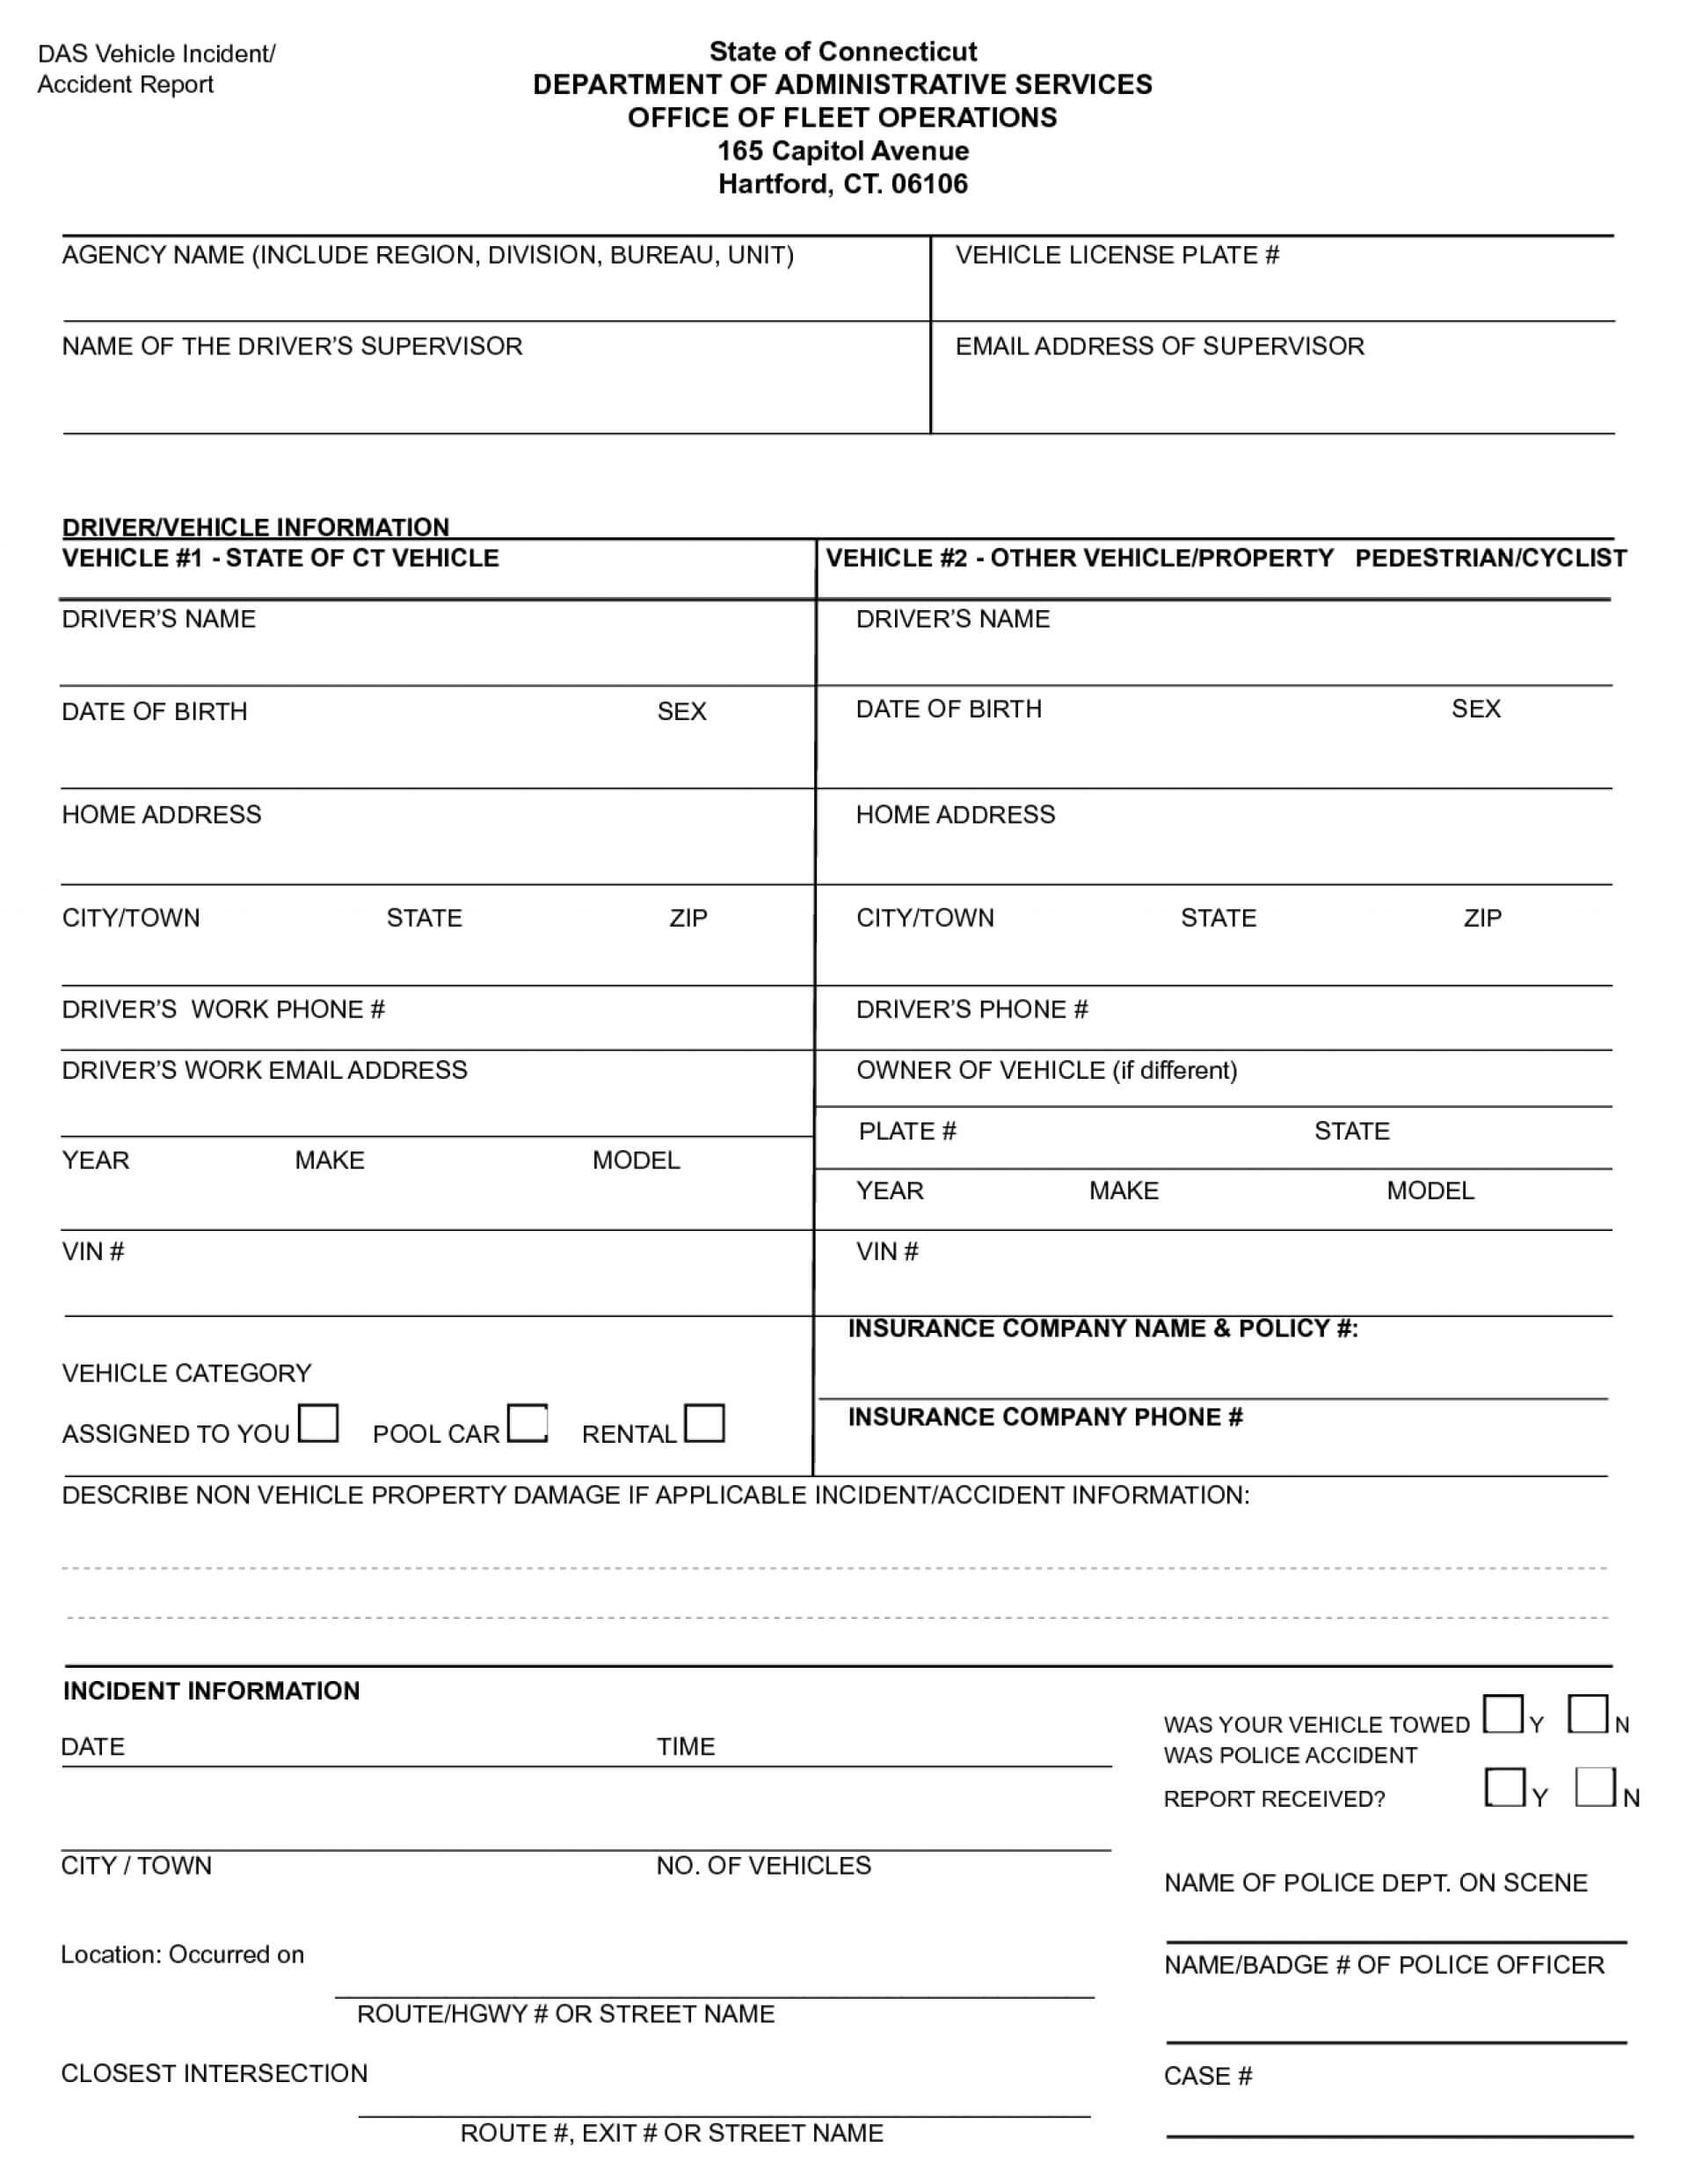 006 Accident Incident Report Form Template 244280 Vehicle Inside Vehicle Accident Report Form Template